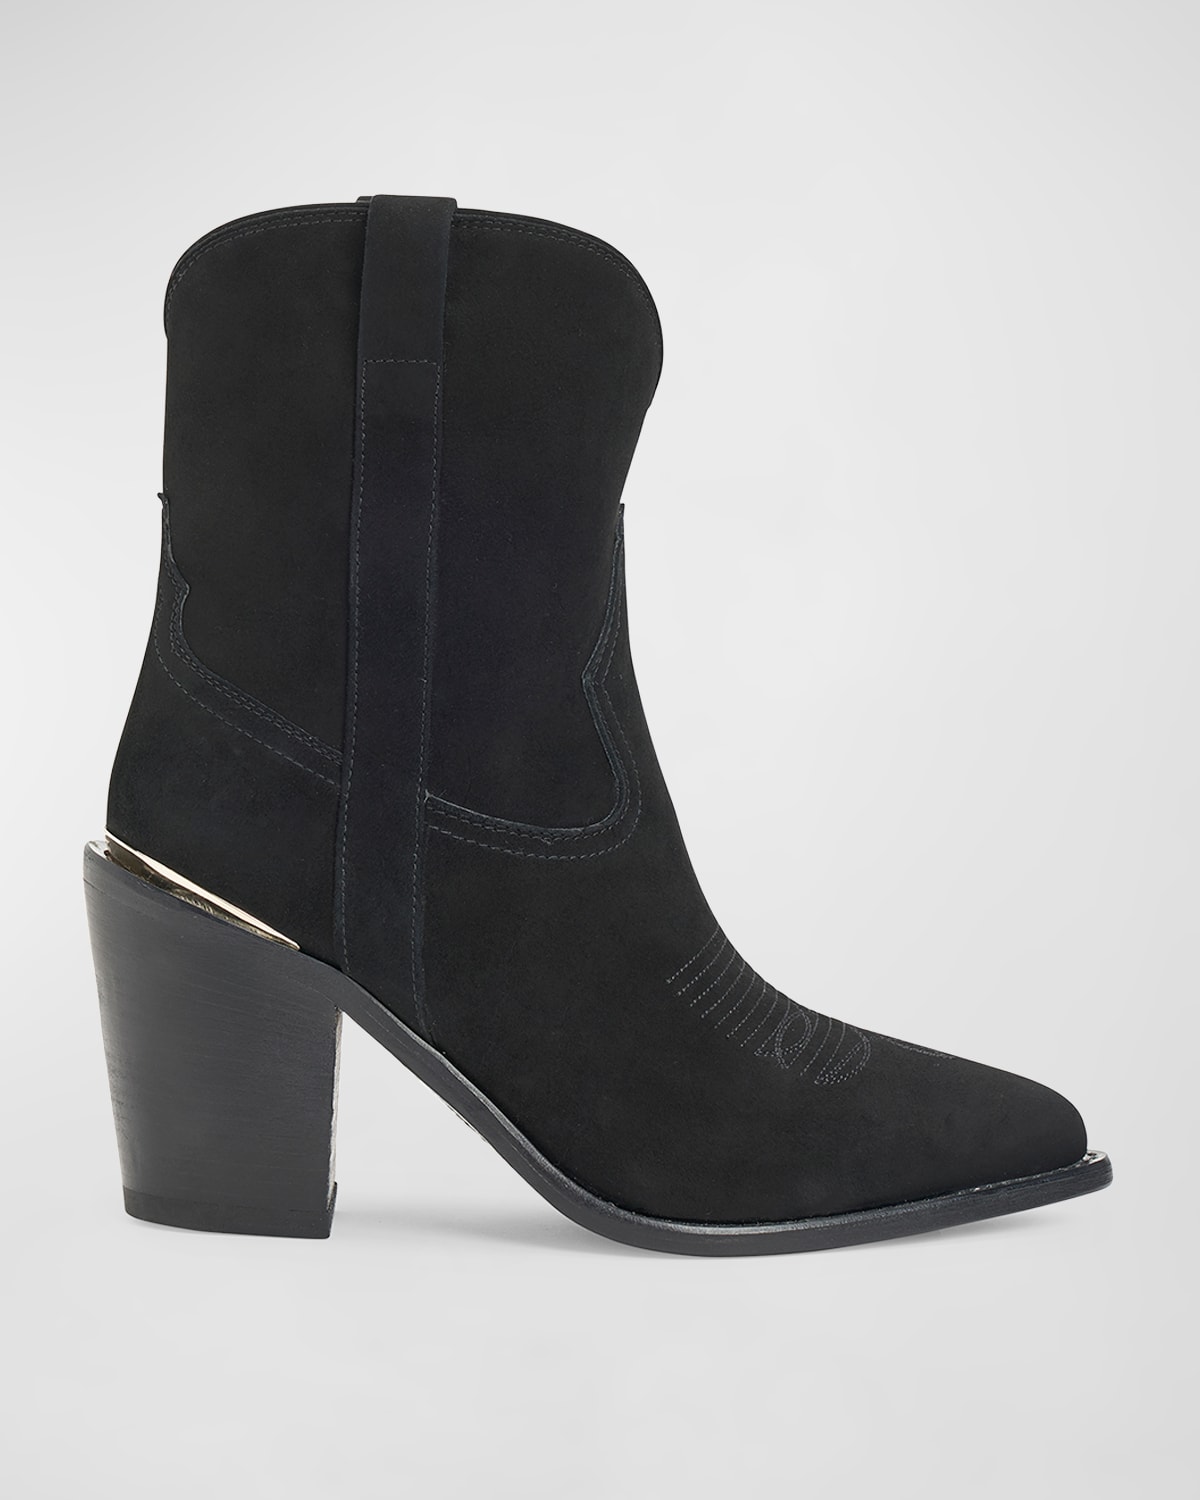 Leigh Anne Suede Western Ankle Booties